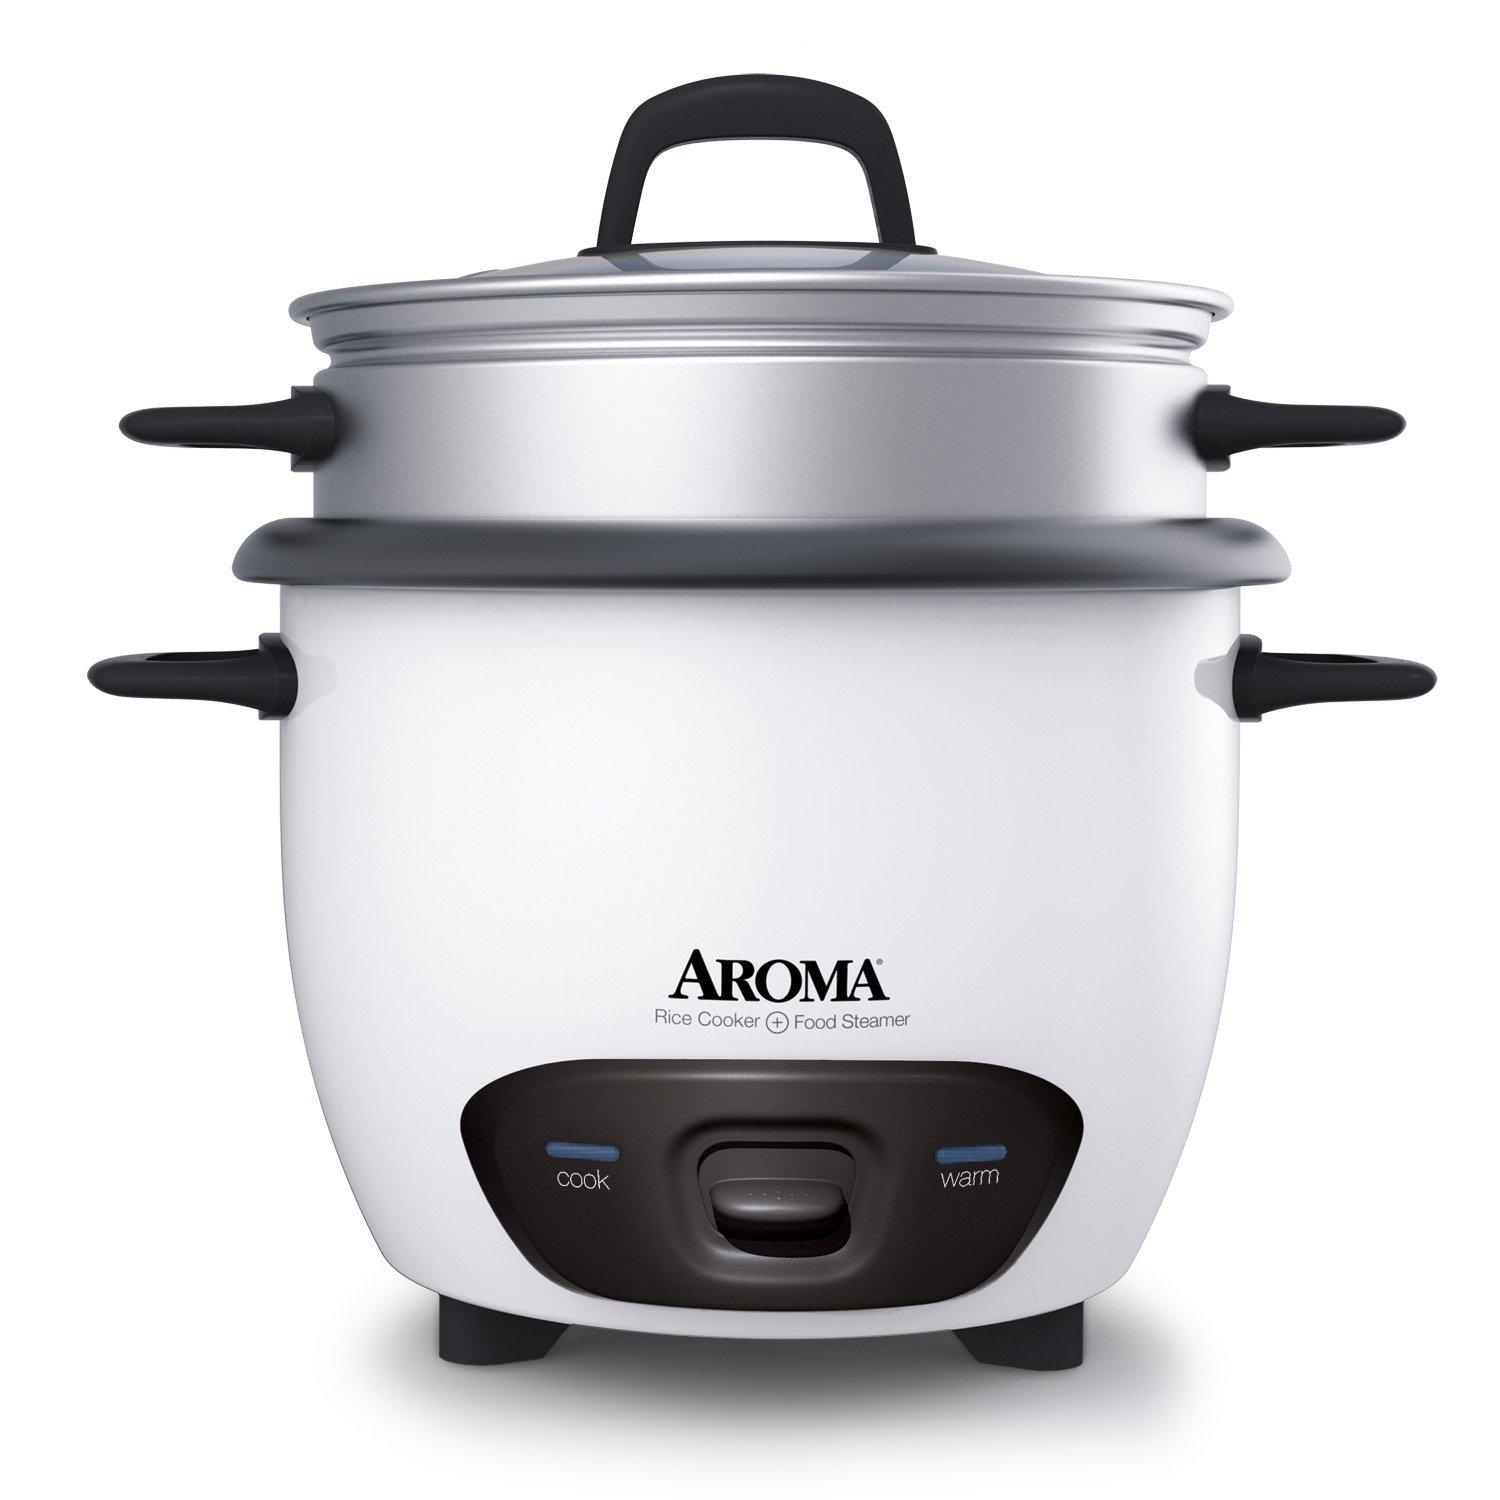 Aroma 6-Cup Pot Style Rice Cooker and Food Steamer – $17.99!